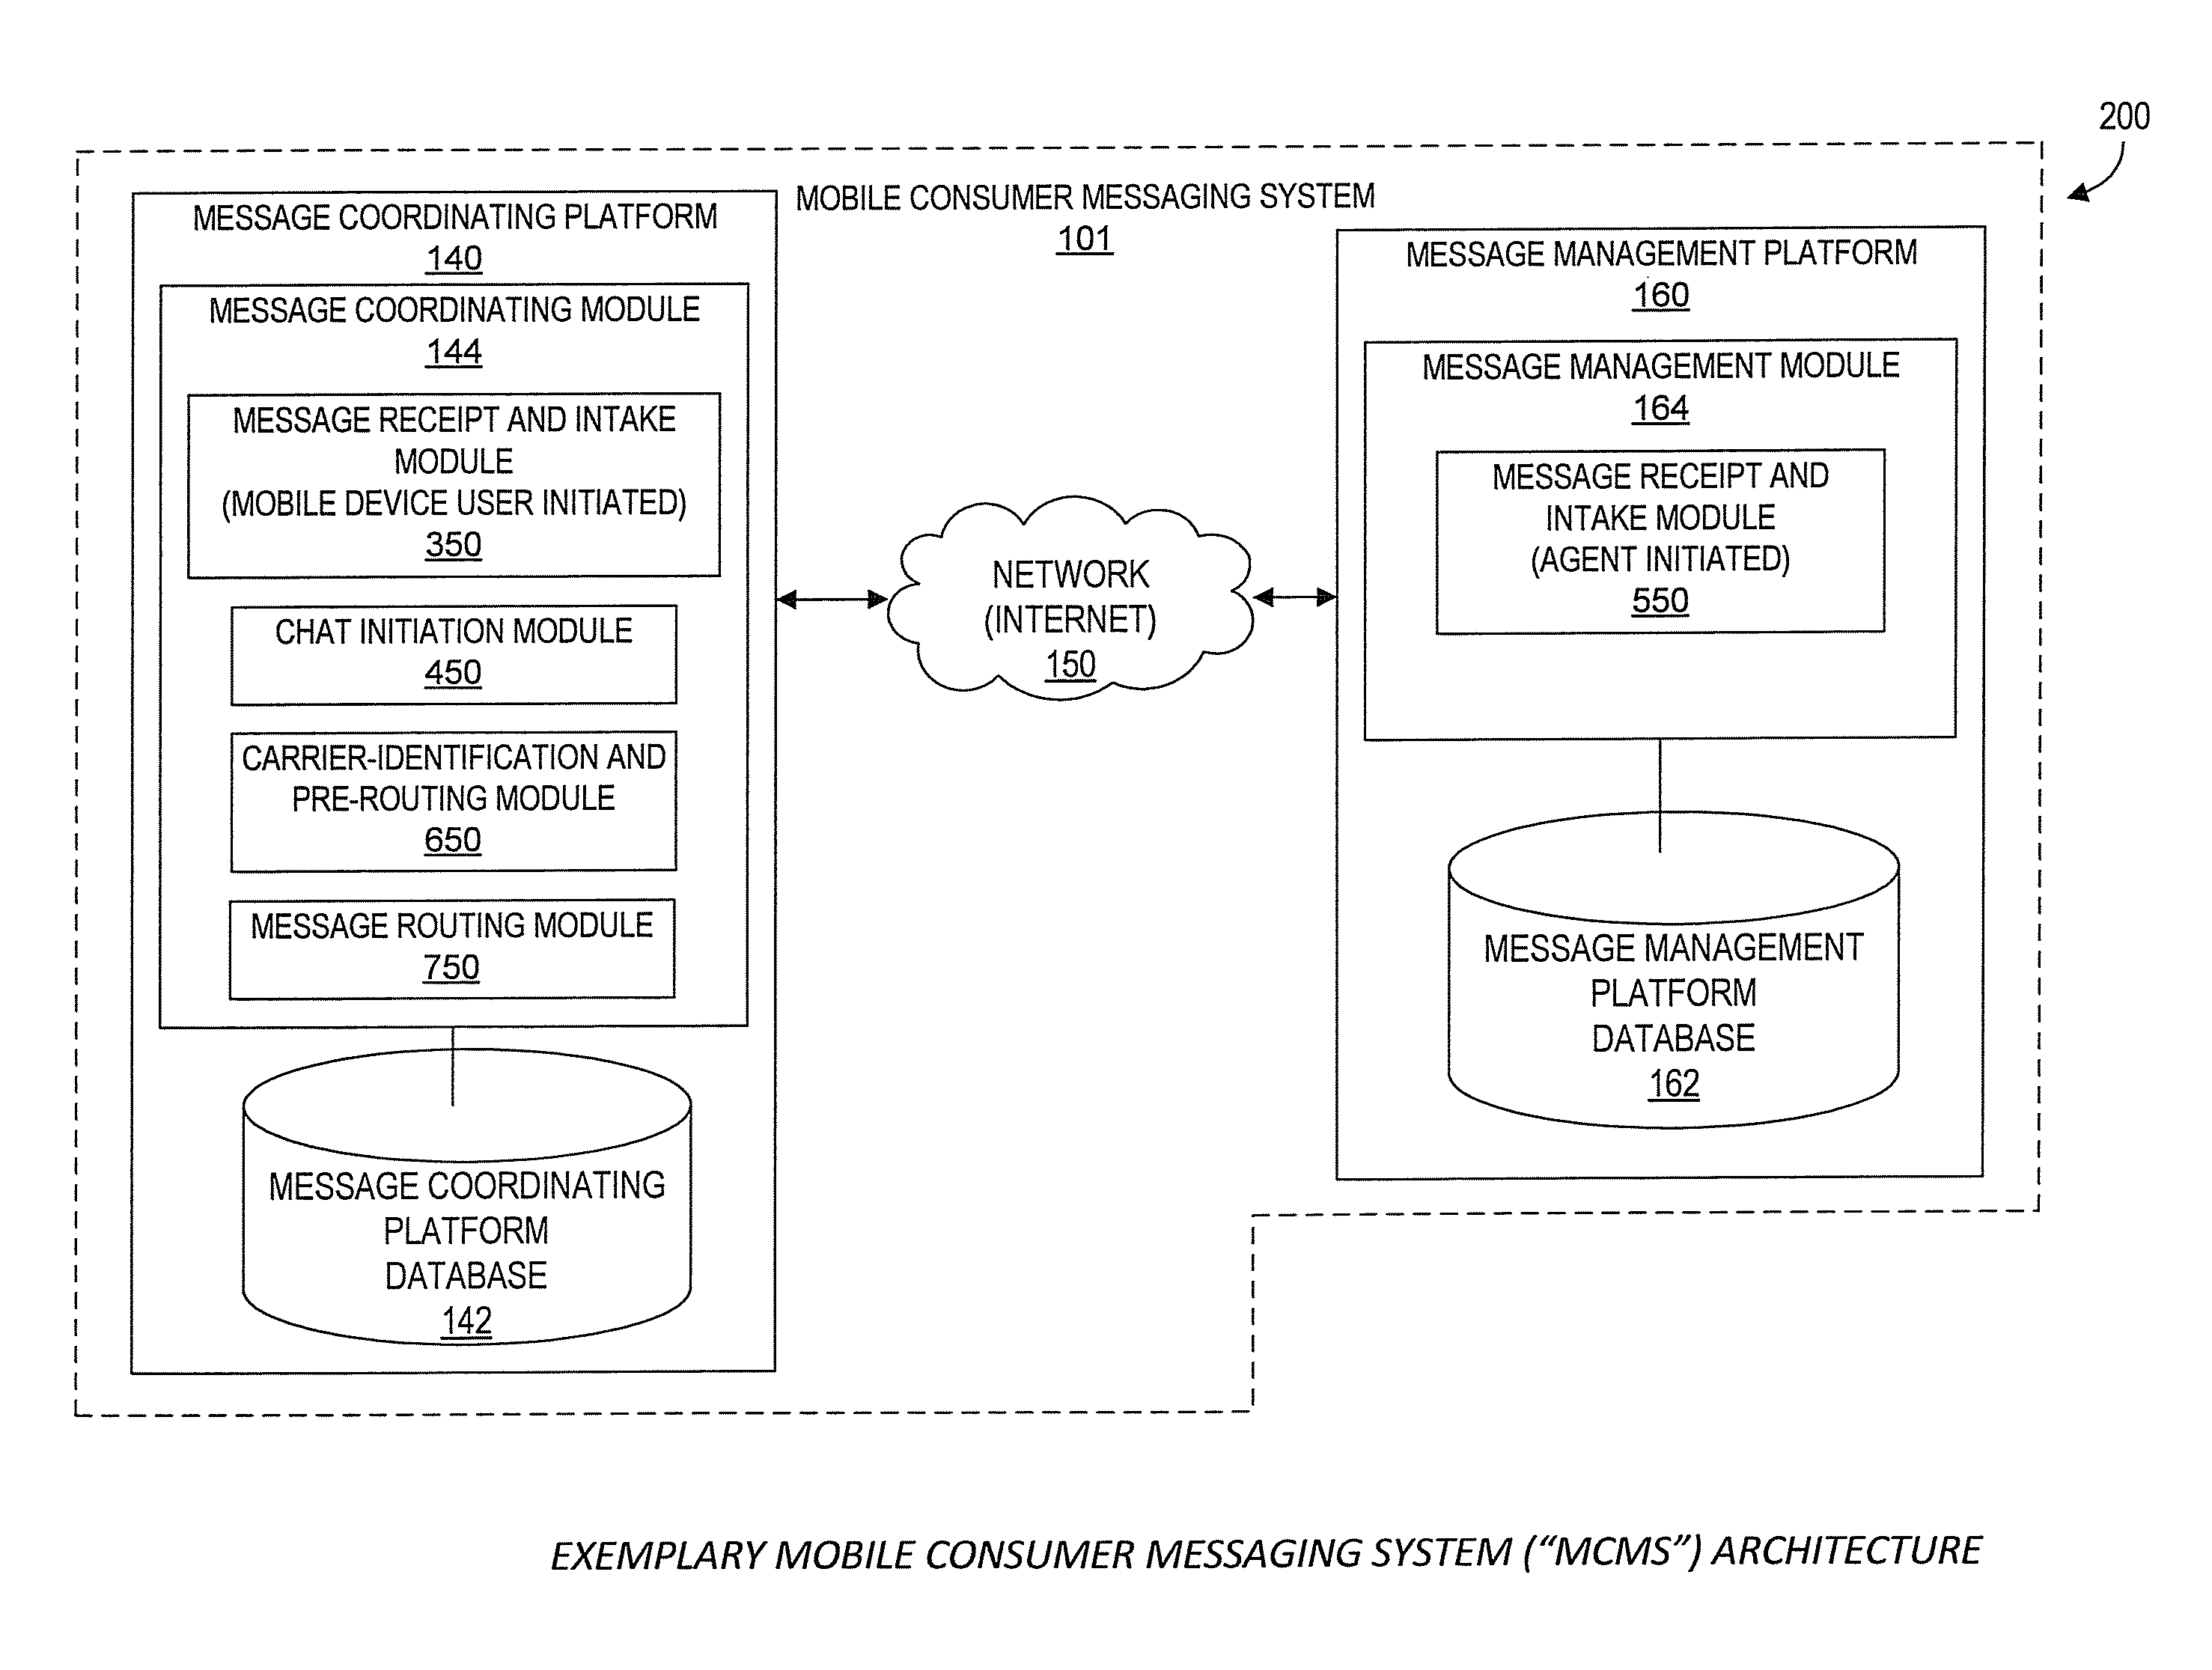 Systems and methods for performing live chat functionality via a mobile device